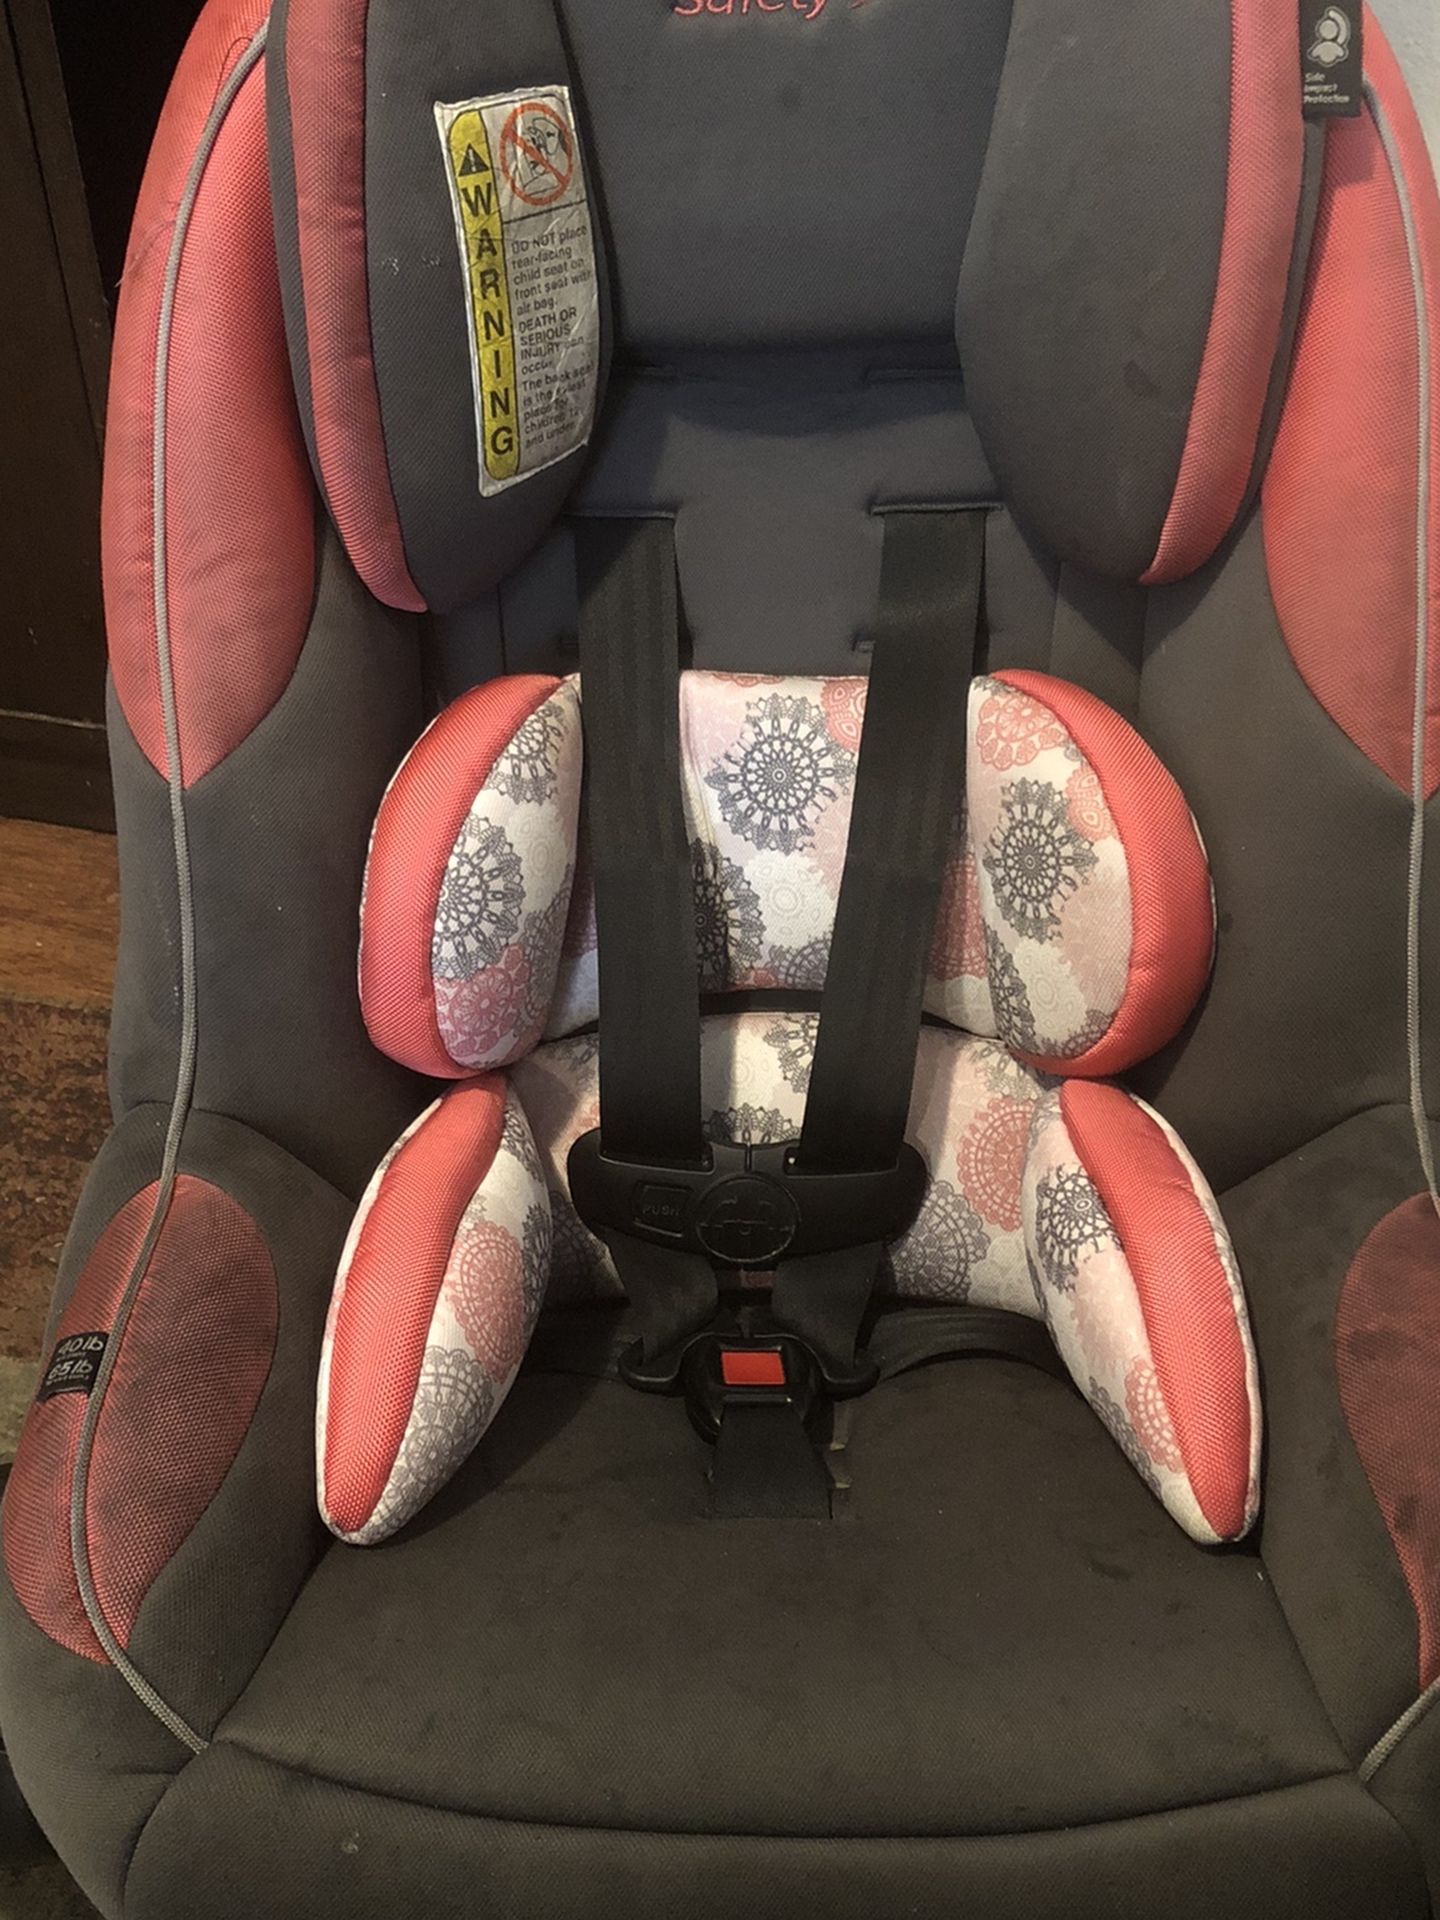 Safety 1st Convertible Car Seat